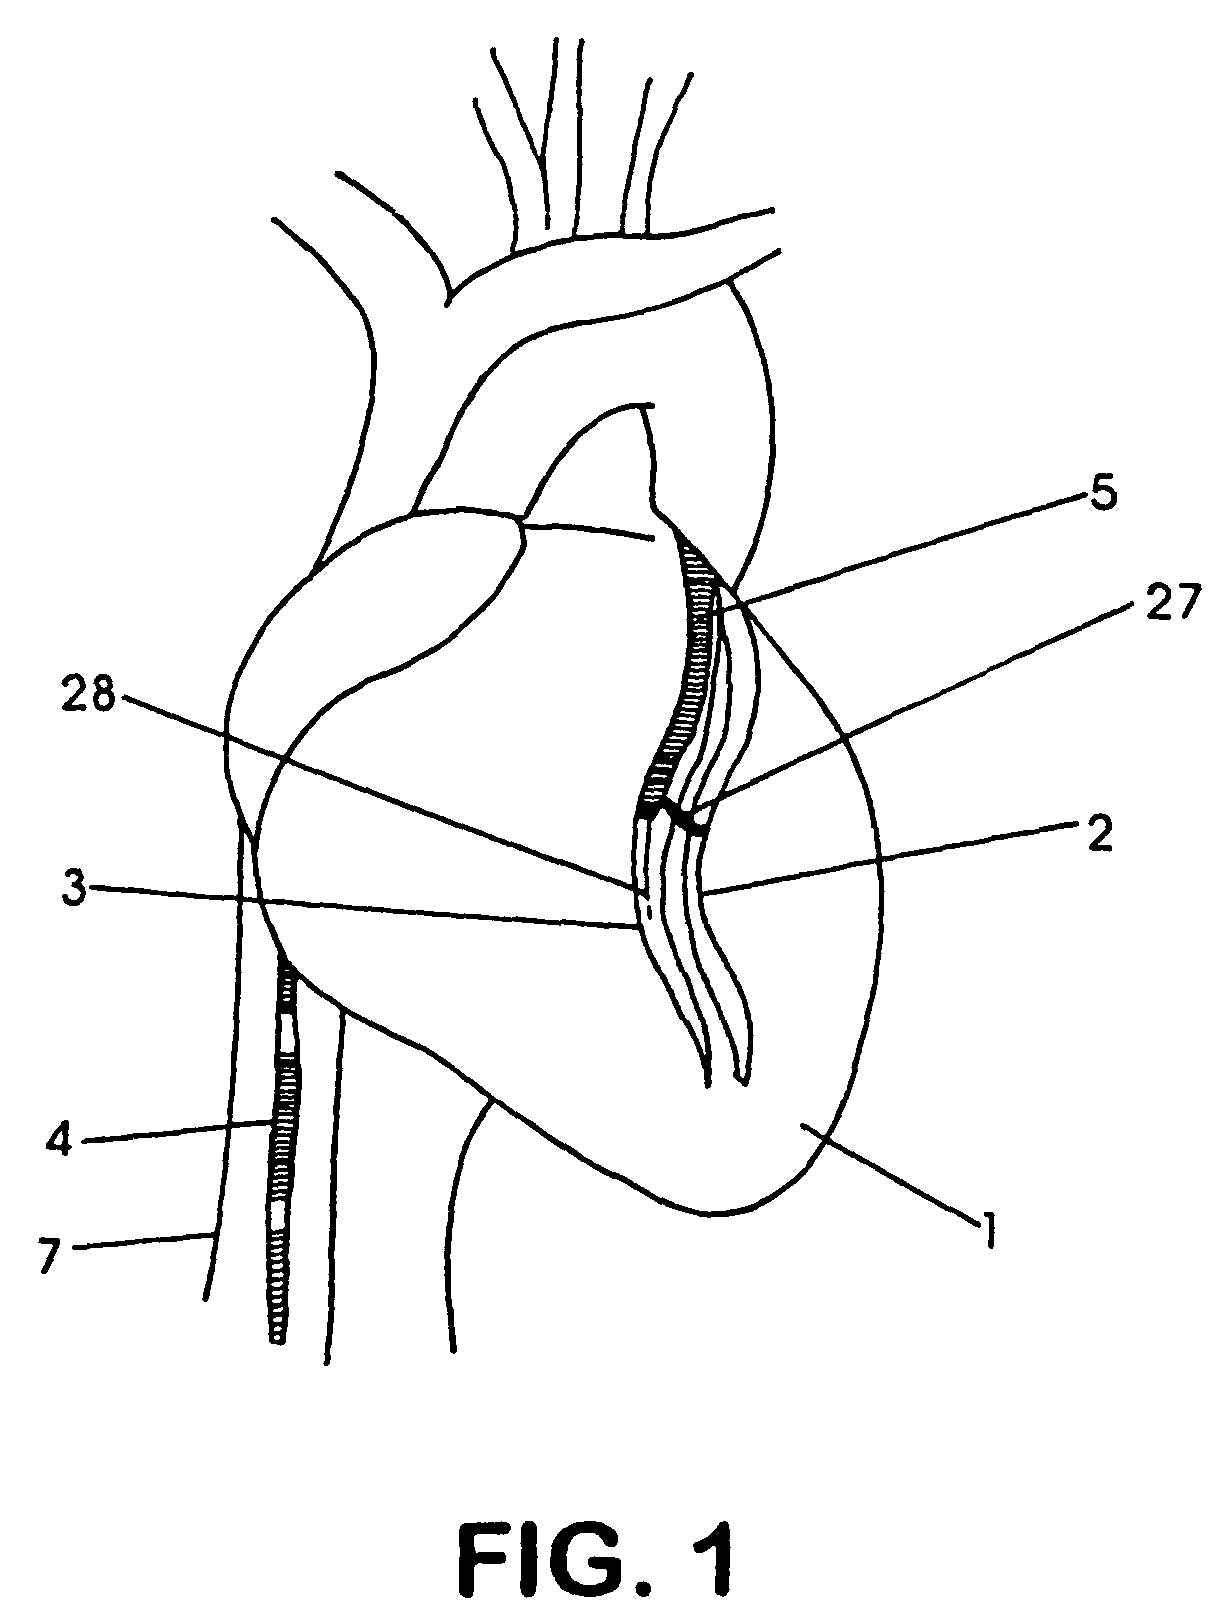 Device, system and method for interstitial transvascular intervention